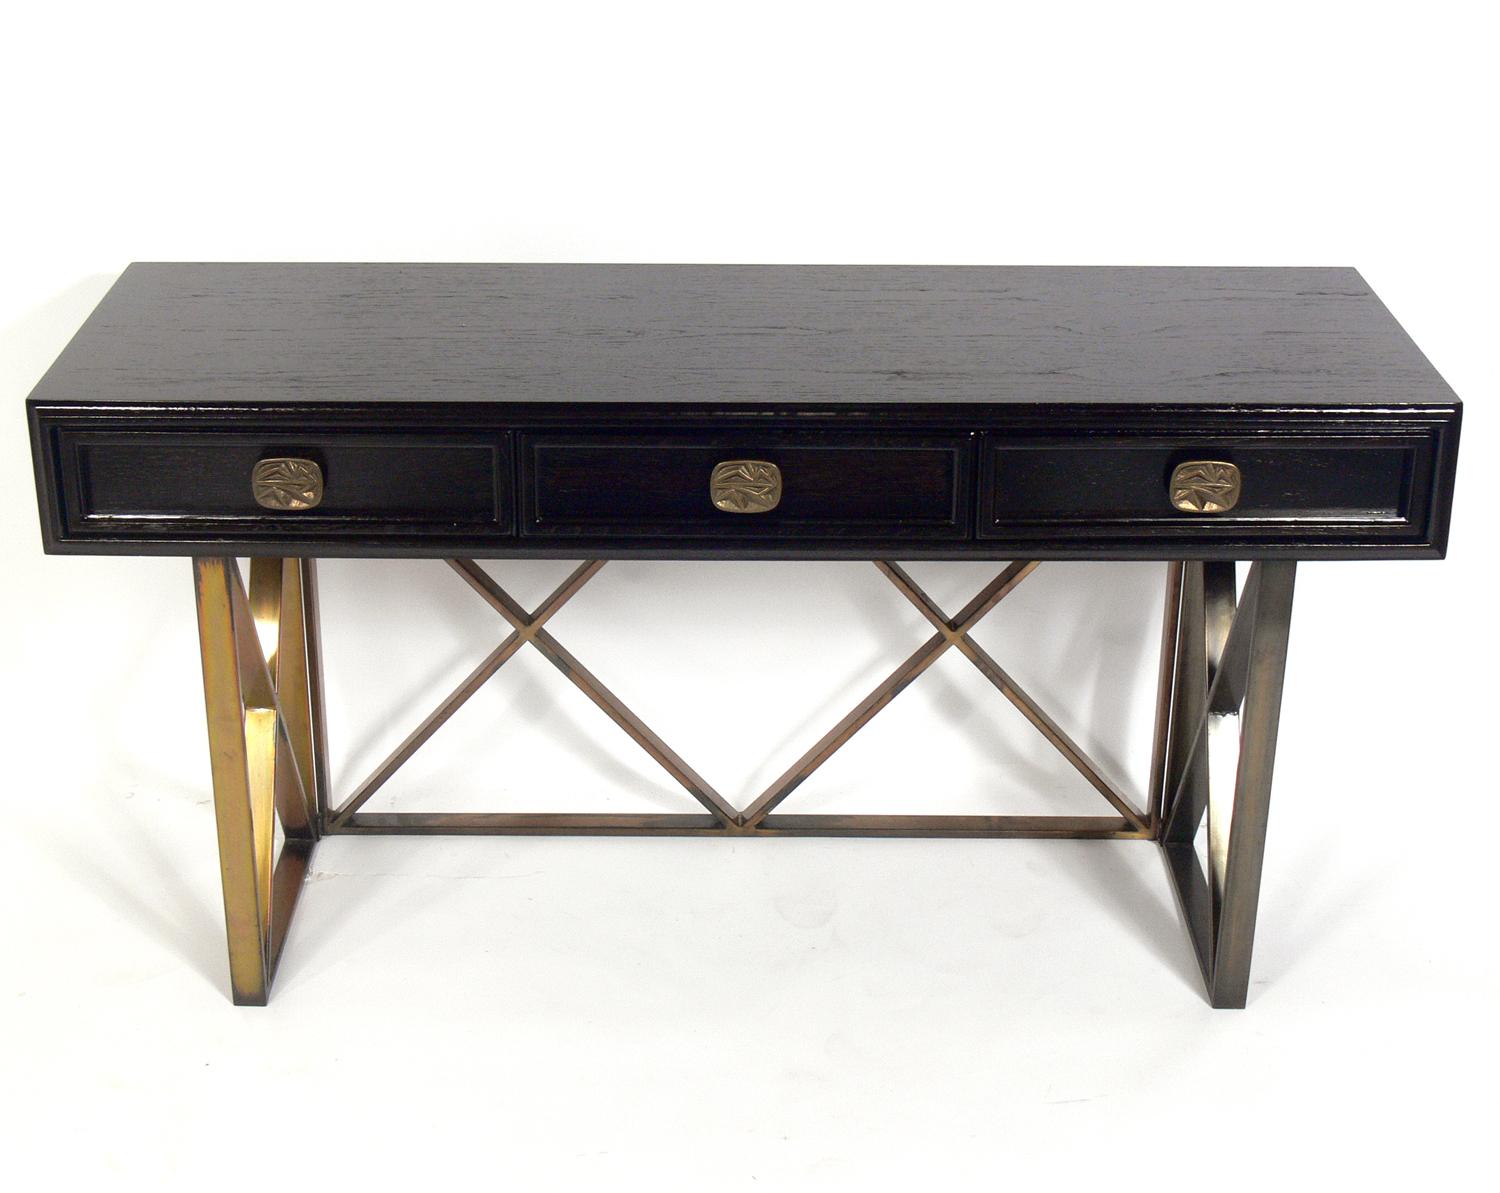 Elegant console table or desk, American, circa 1950s. This piece is a versatile size and can be used as a console table, desk, sofa table, bar, or vanity. It has been refinished in an ultra-deep brown lacquer and retains it's original patina to the